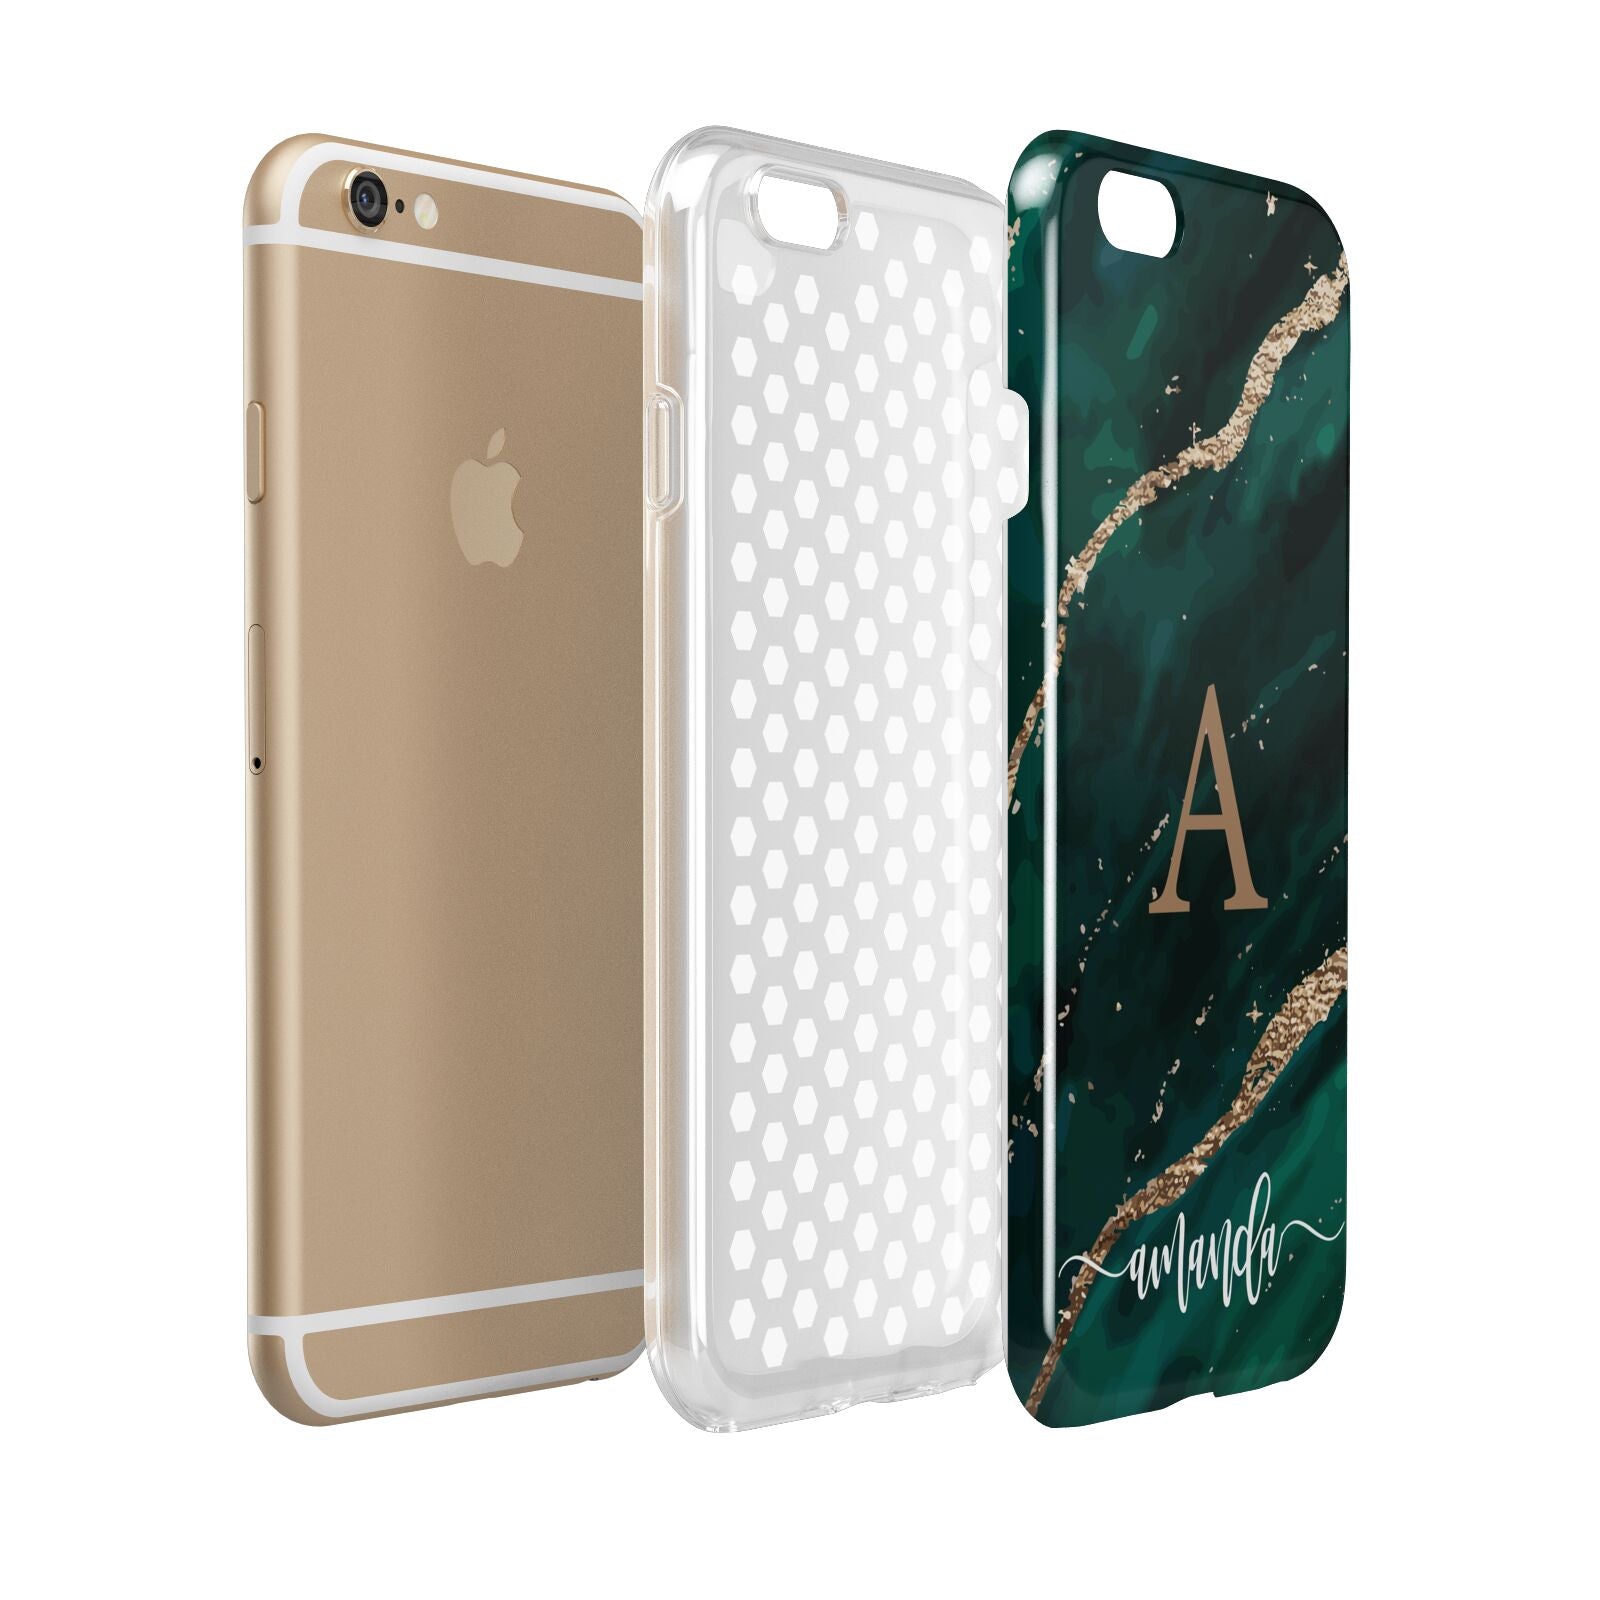 Green Marble Apple iPhone 6 3D Tough Case Expanded view